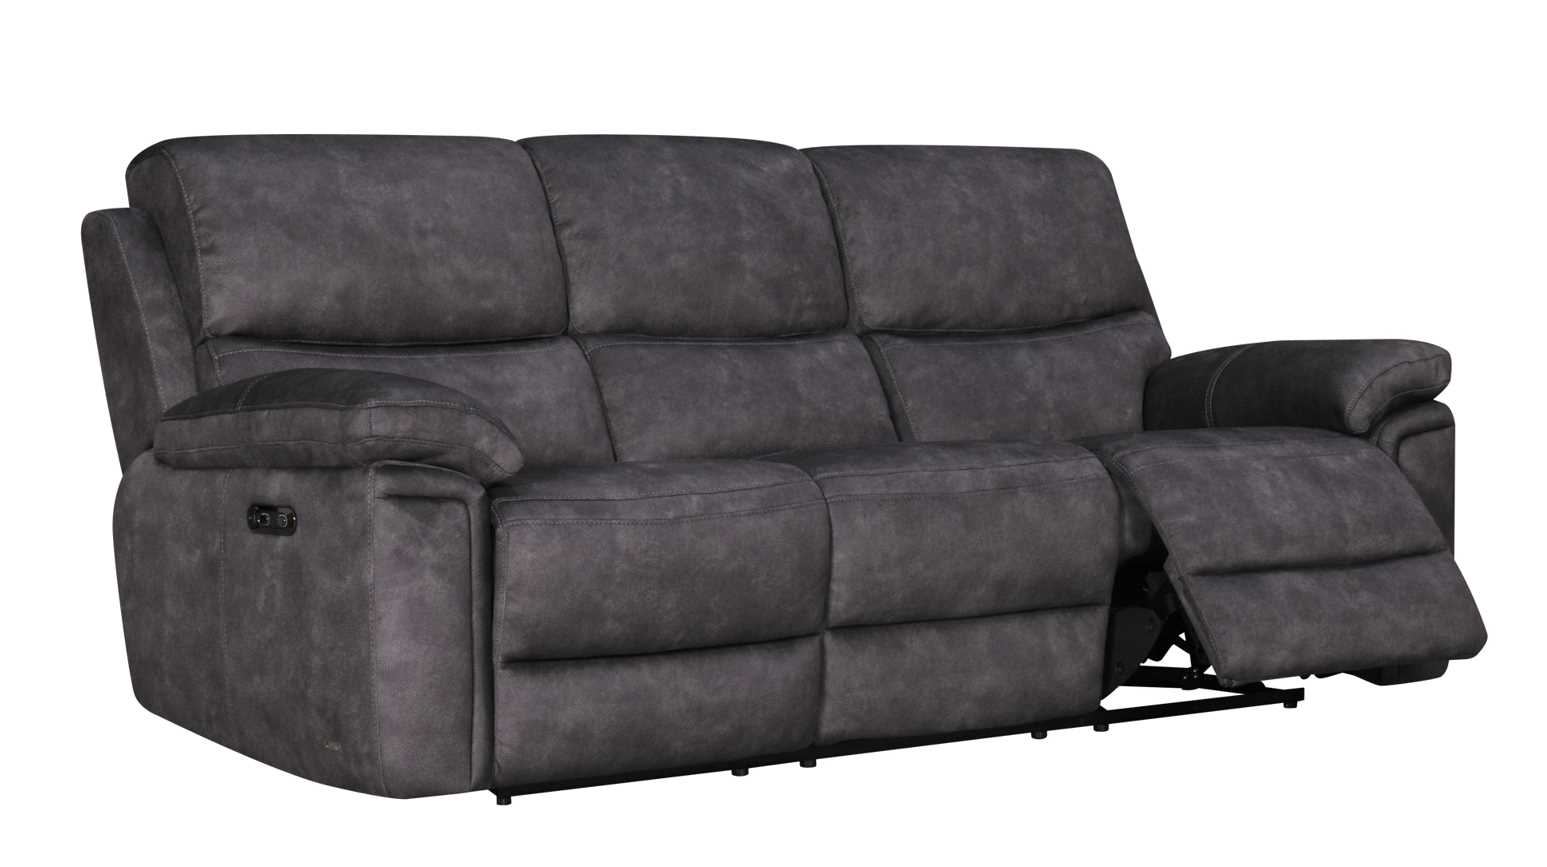 Ultimate Comfort Elegance Discovering the Reclining Charm of Chesterfield Sofas  %Post Title